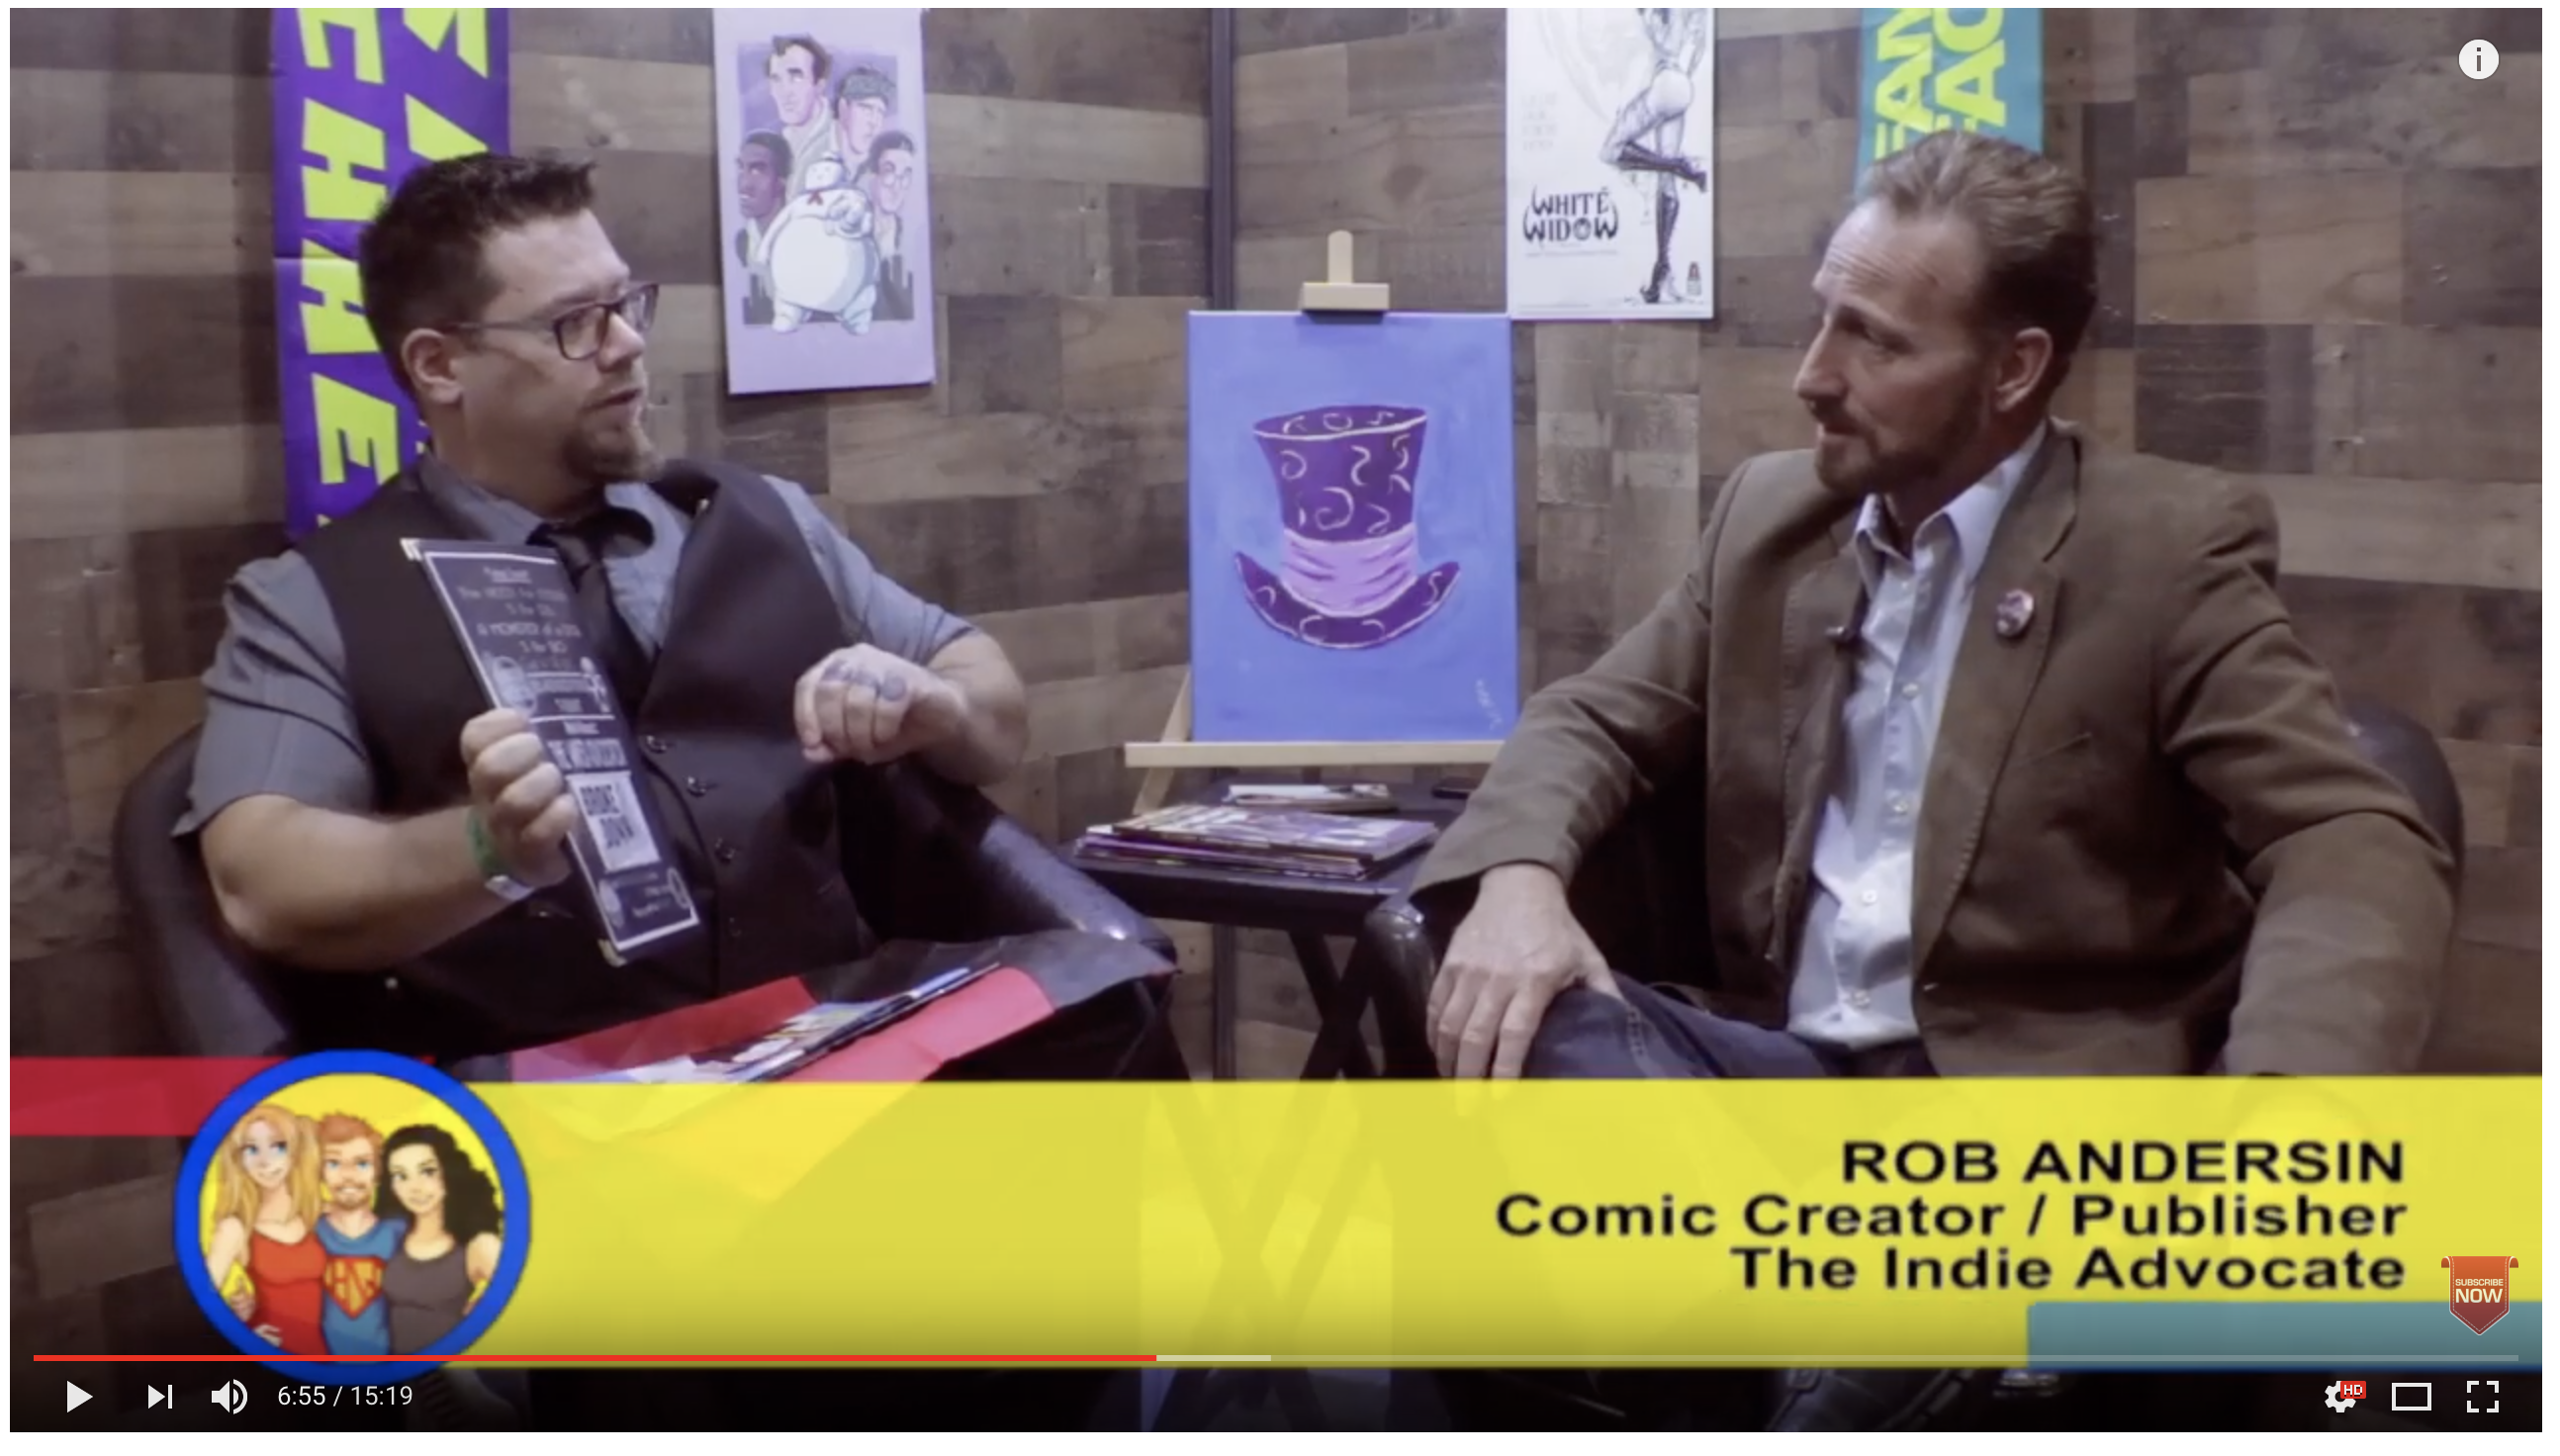 Unboxing the Indie Comics with Indie Advocate Rob AnderSiN: an Interview on the Hangin With Web Show